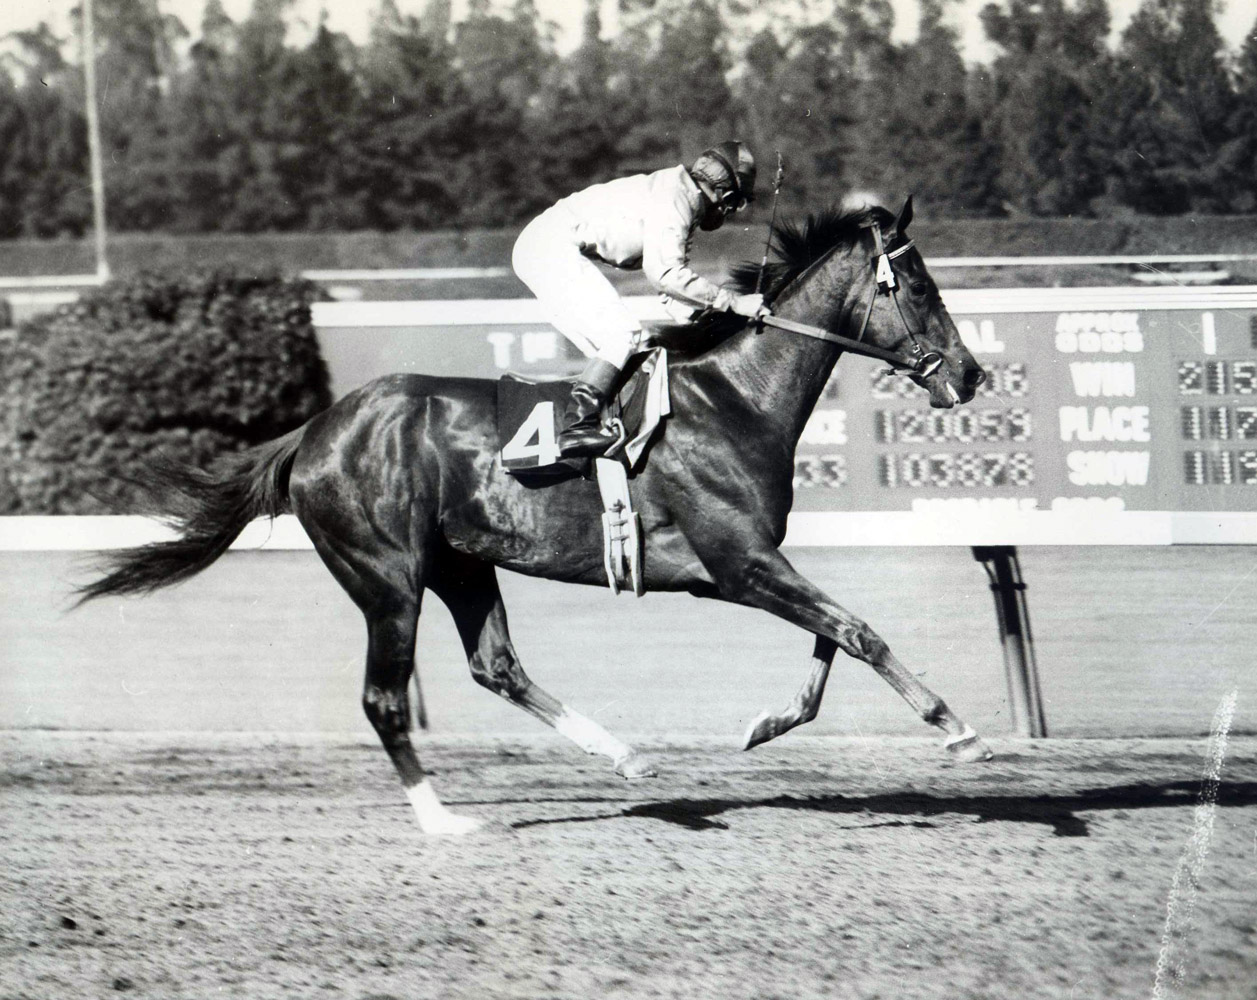 Silver Spoon (Bill Boland up) winning the 1959 Cinema Handicap at Hollywood Park (Museum Collection)